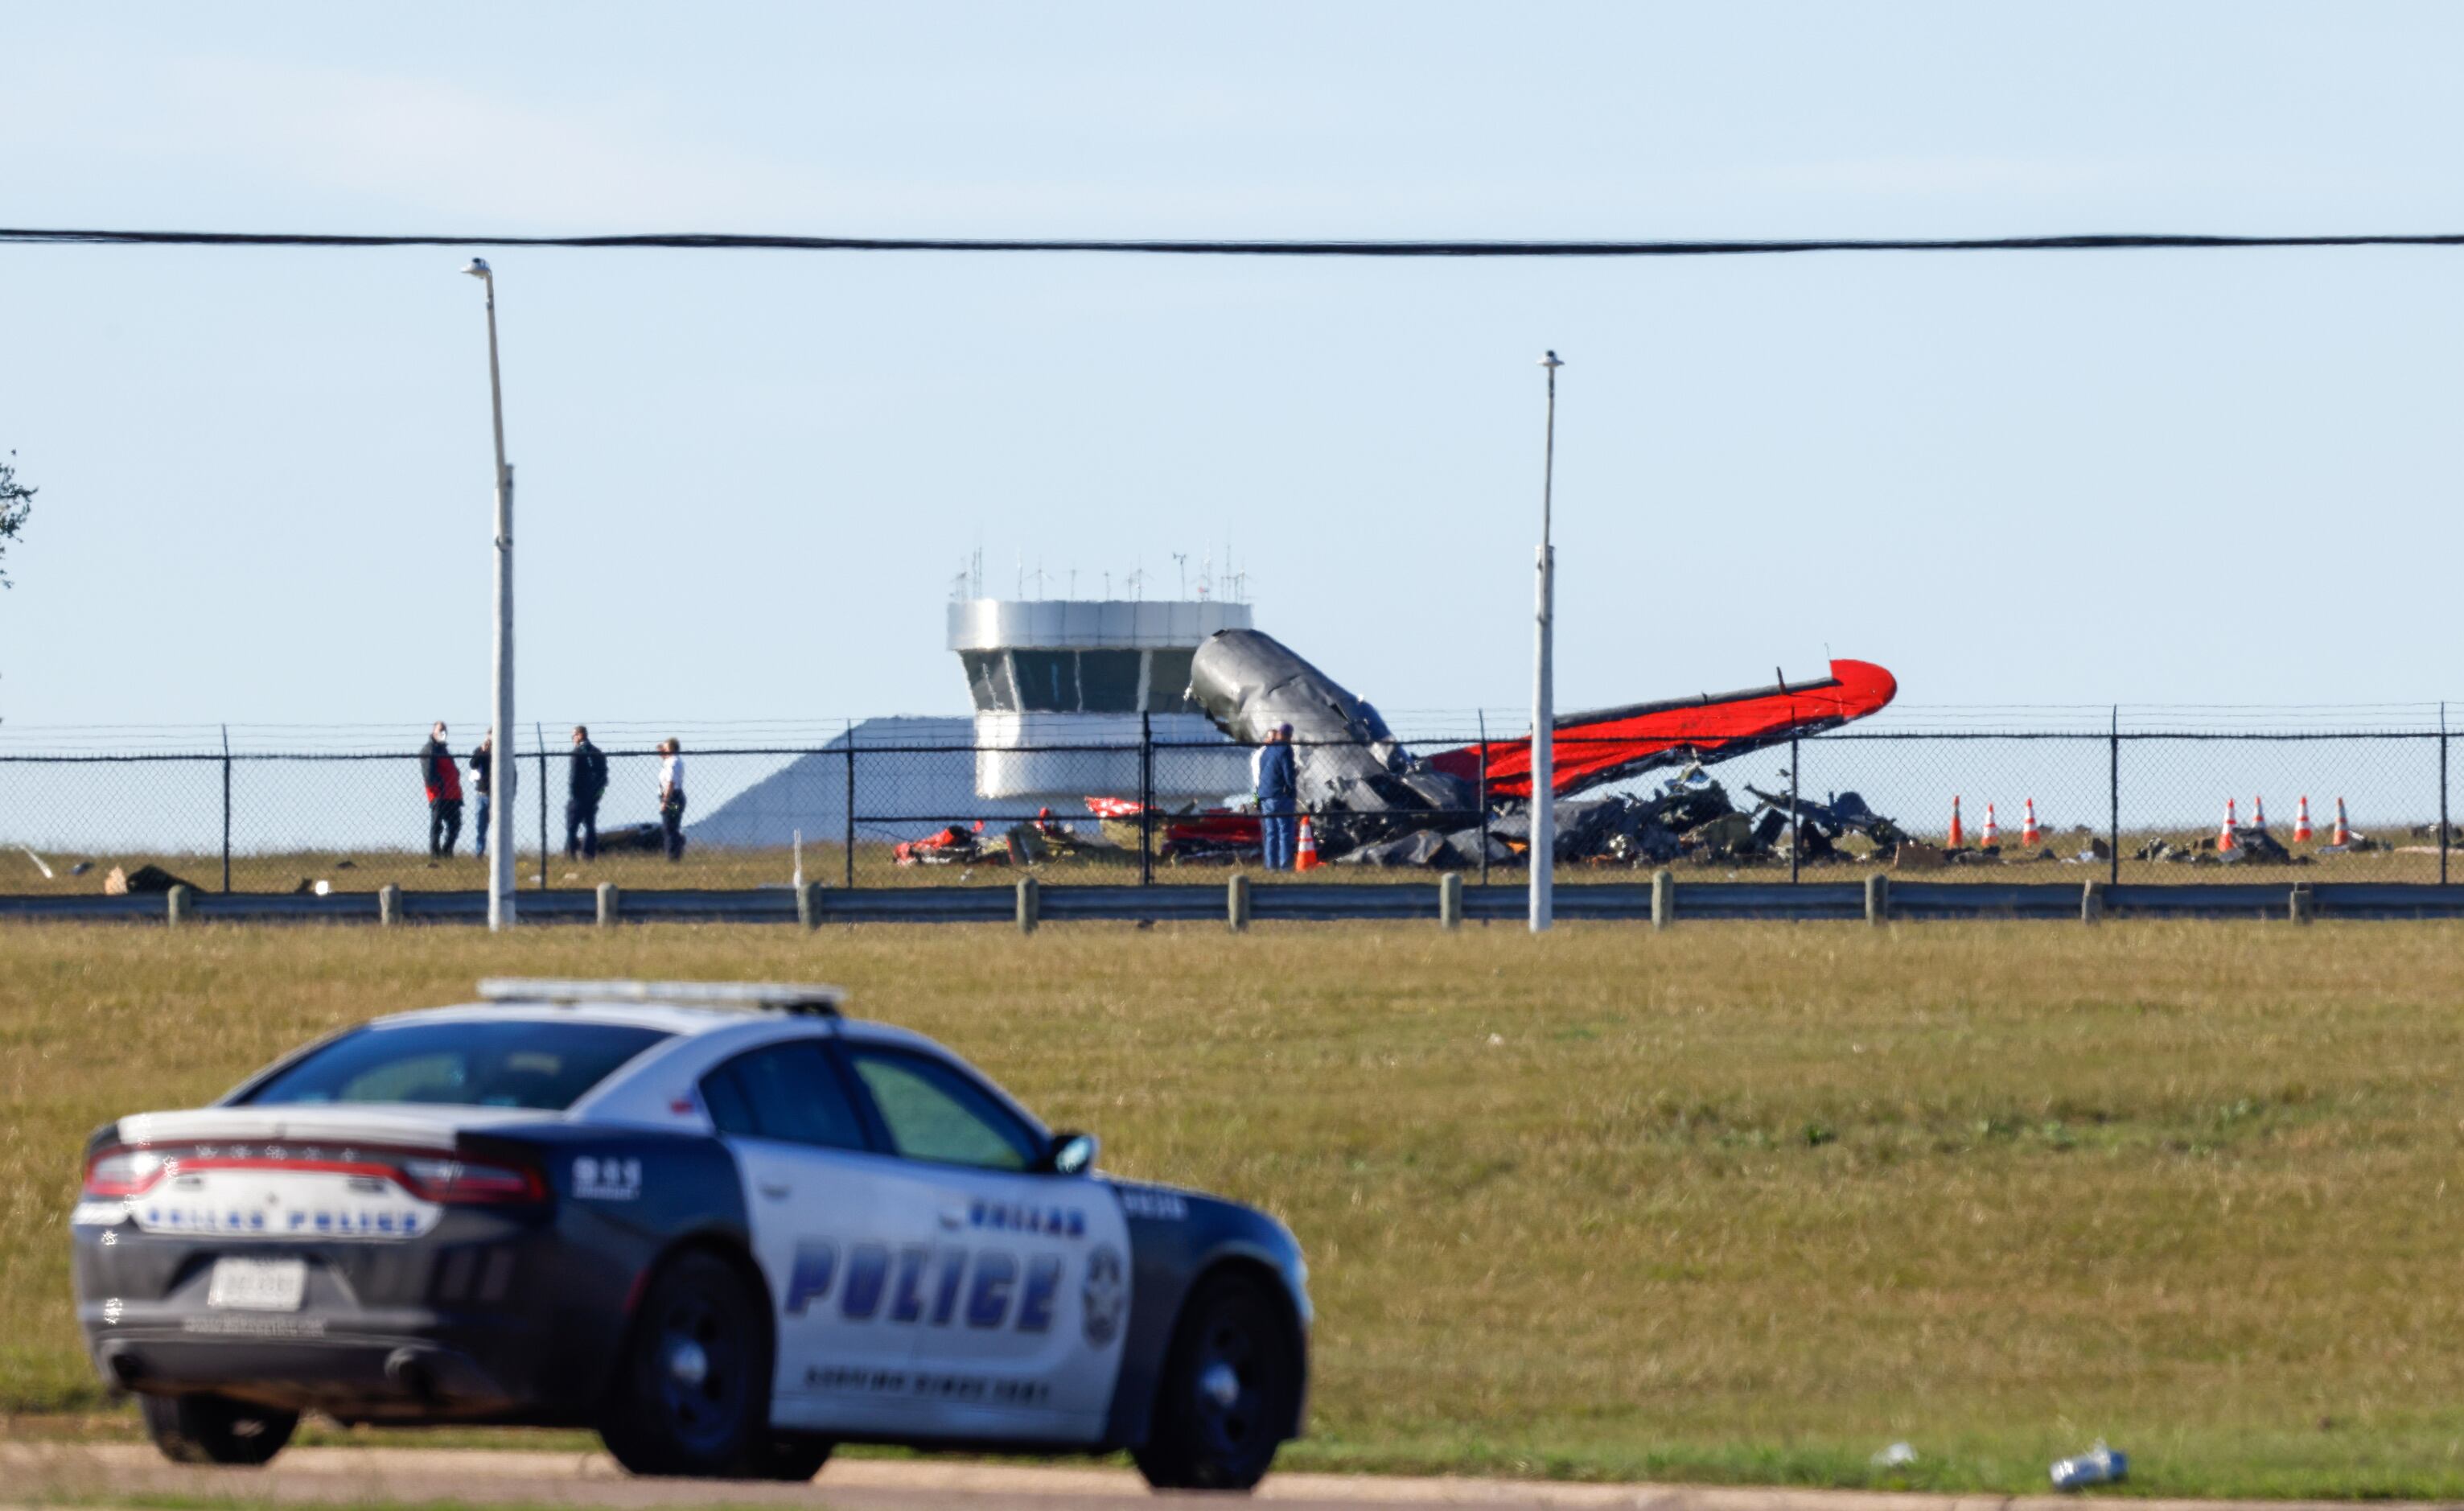 Police respond to a mid-air collision between two planes within the fence line of the Dallas...